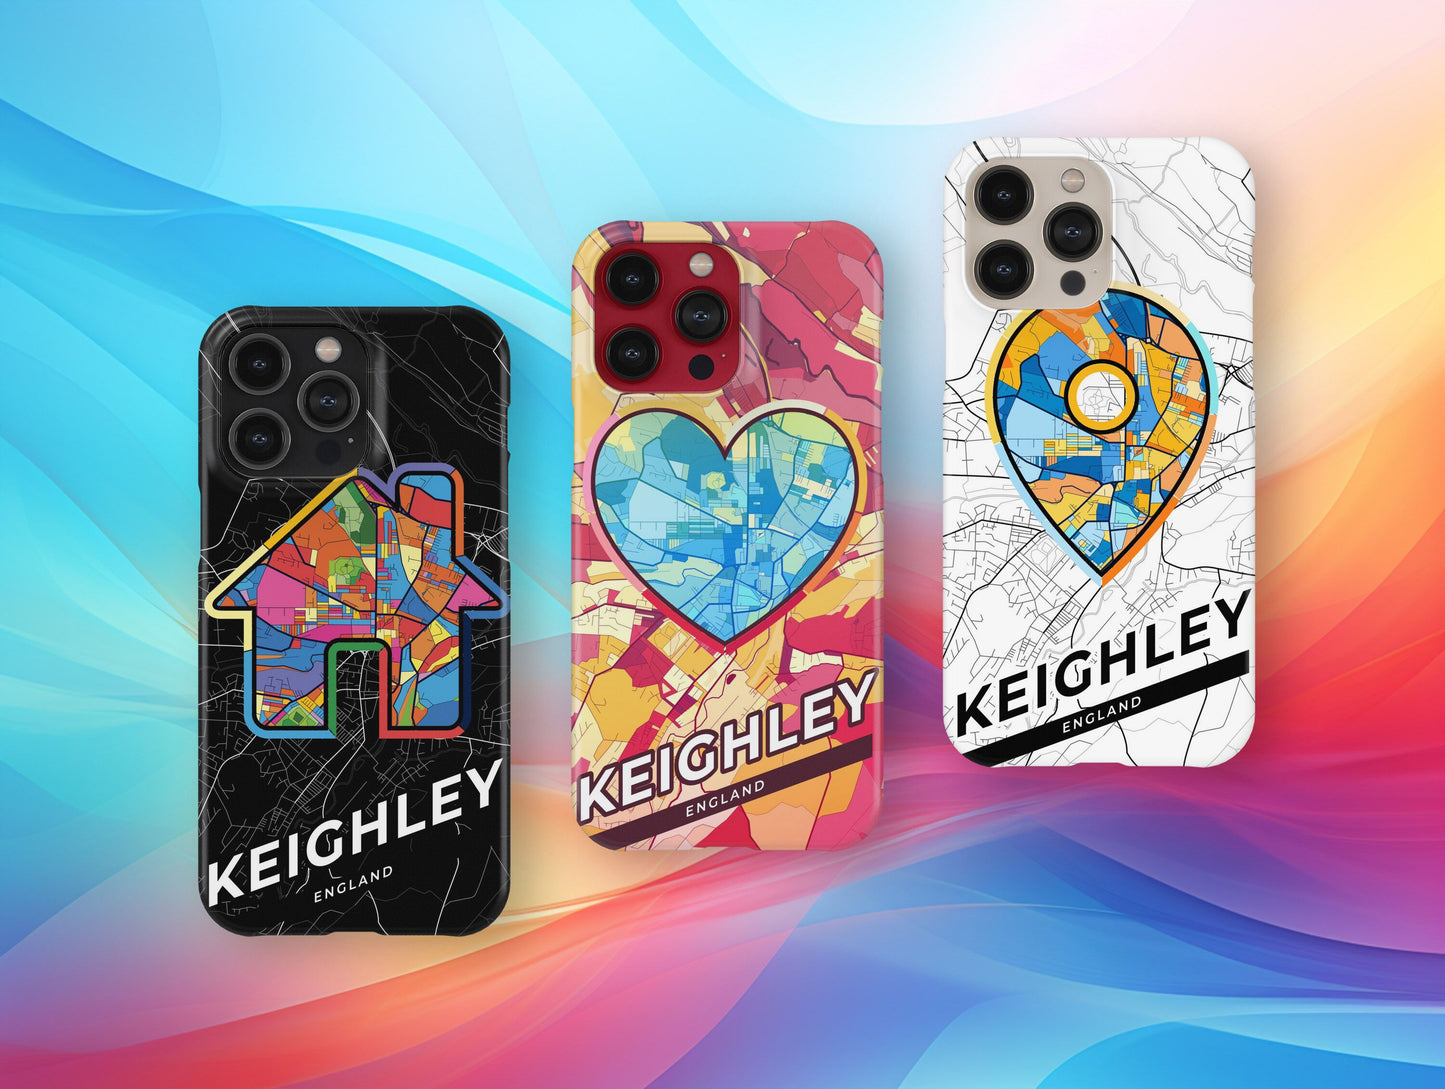 Keighley England slim phone case with colorful icon. Birthday, wedding or housewarming gift. Couple match cases.